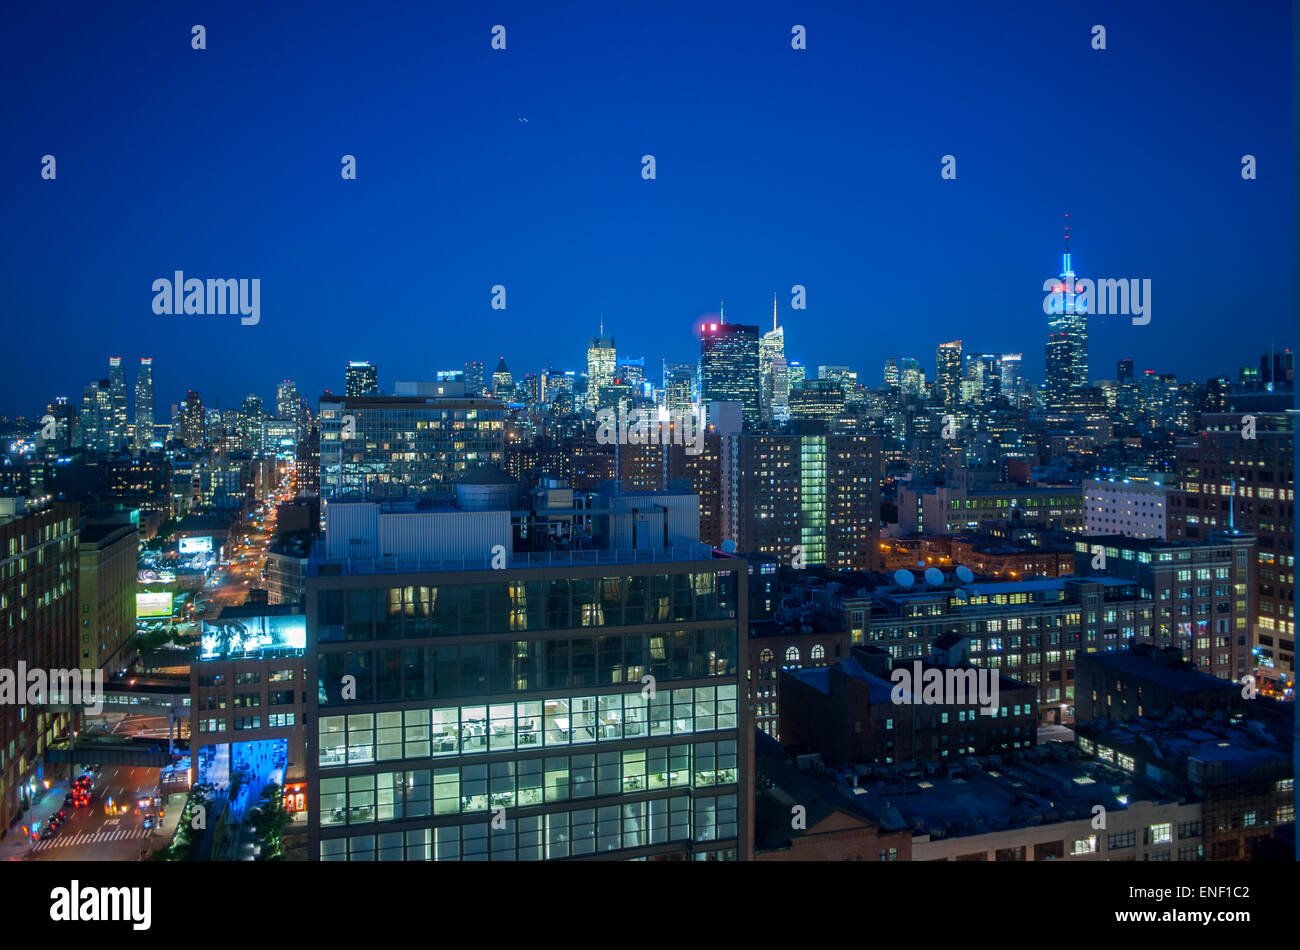 New York CIty, NY, USA, Nighttime Overviews, City Scapes / Skylines US Cities, Manhattan, Stock Photo